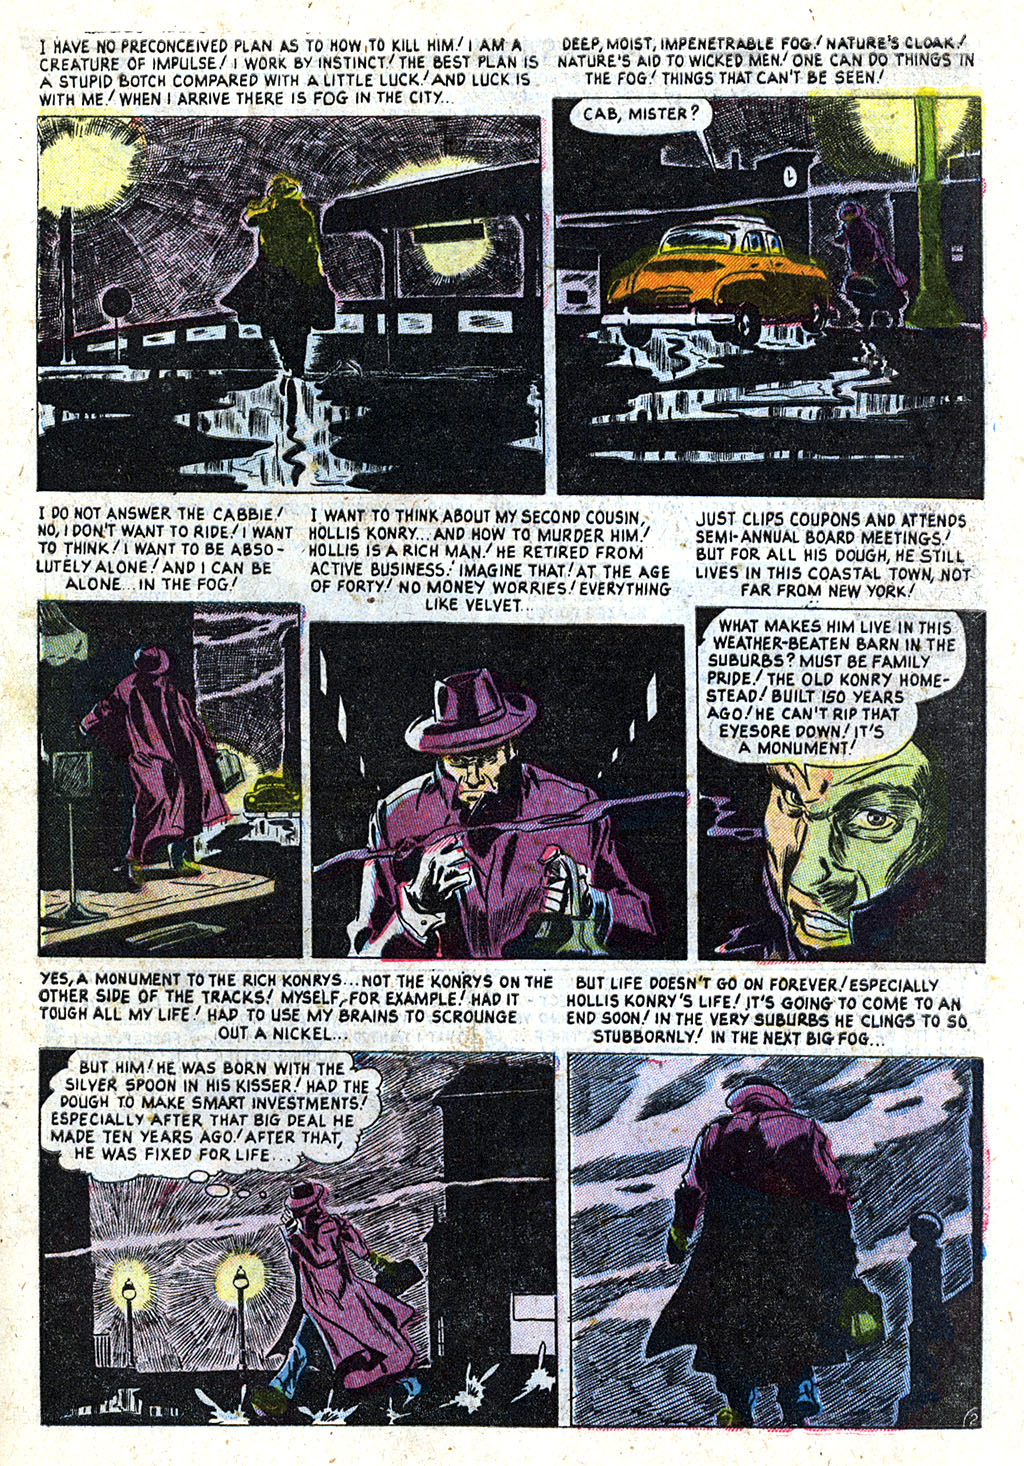 Marvel Tales (1949) 107 Page 28